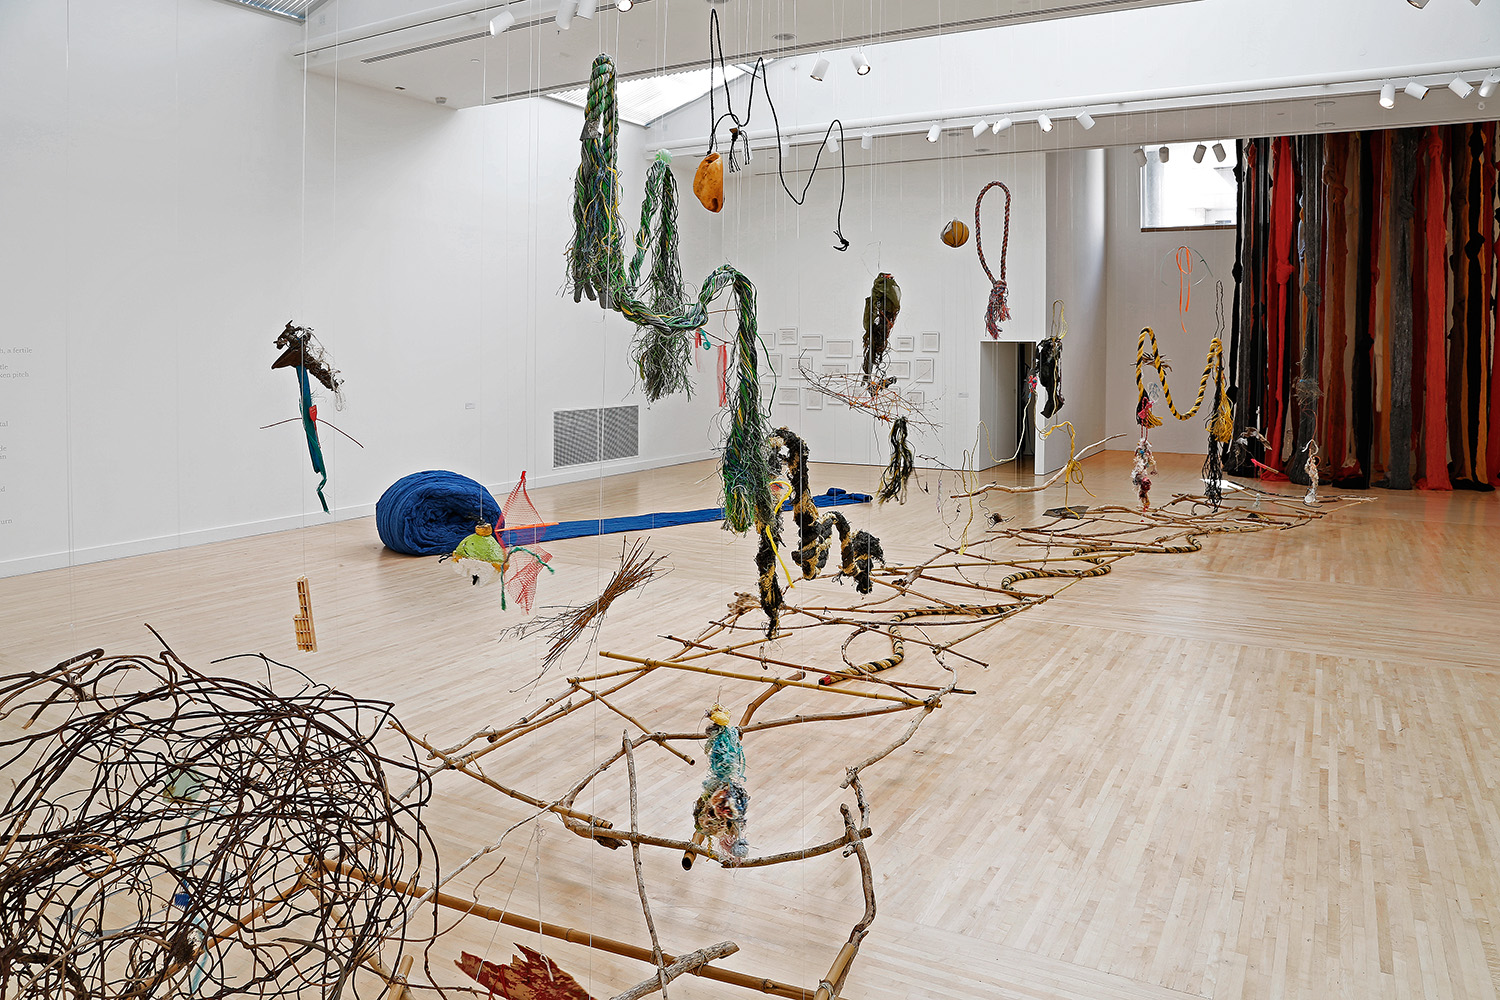 Installation view of Cecilia Vicuna's exhibition displaying a long, connected sculpture leading to a tall curtain of fabric in the background